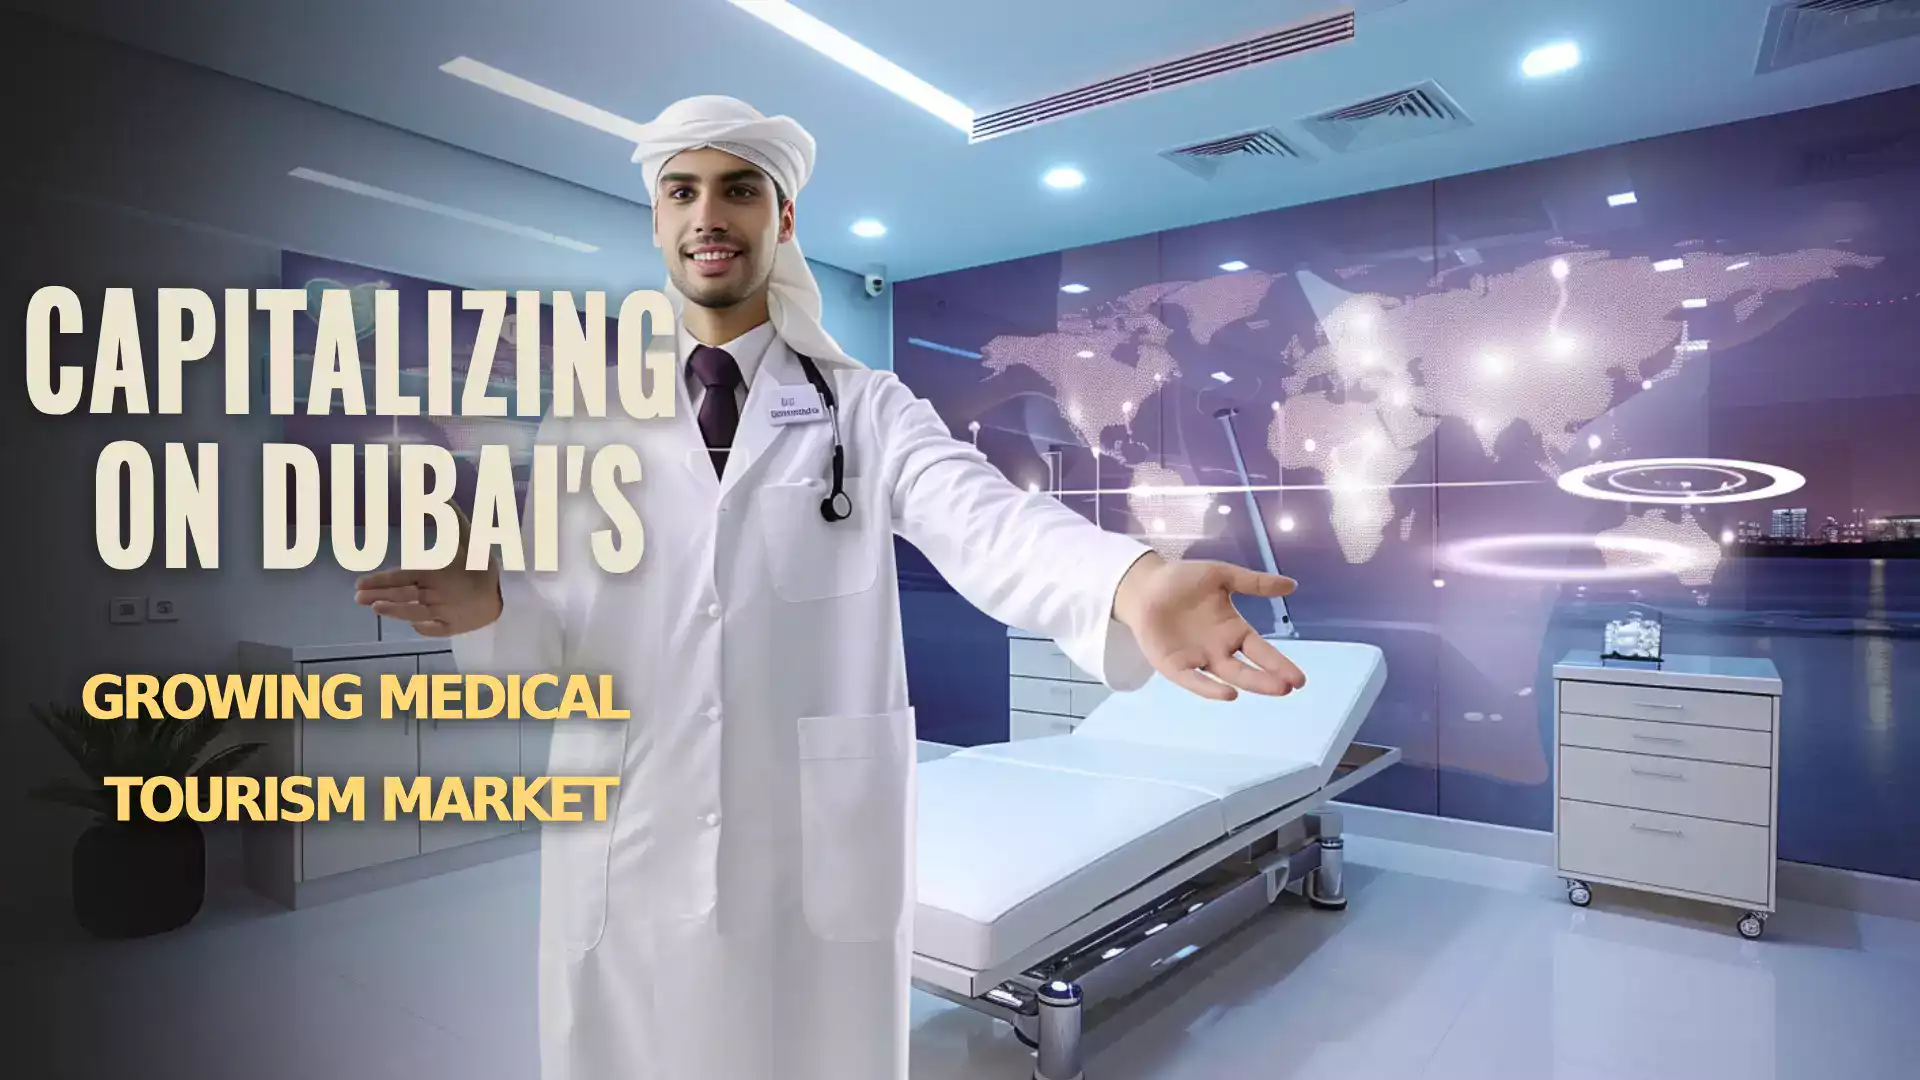 Image illustrating Dubai's advanced medical facilities, reflecting the city's appeal for medical tourists